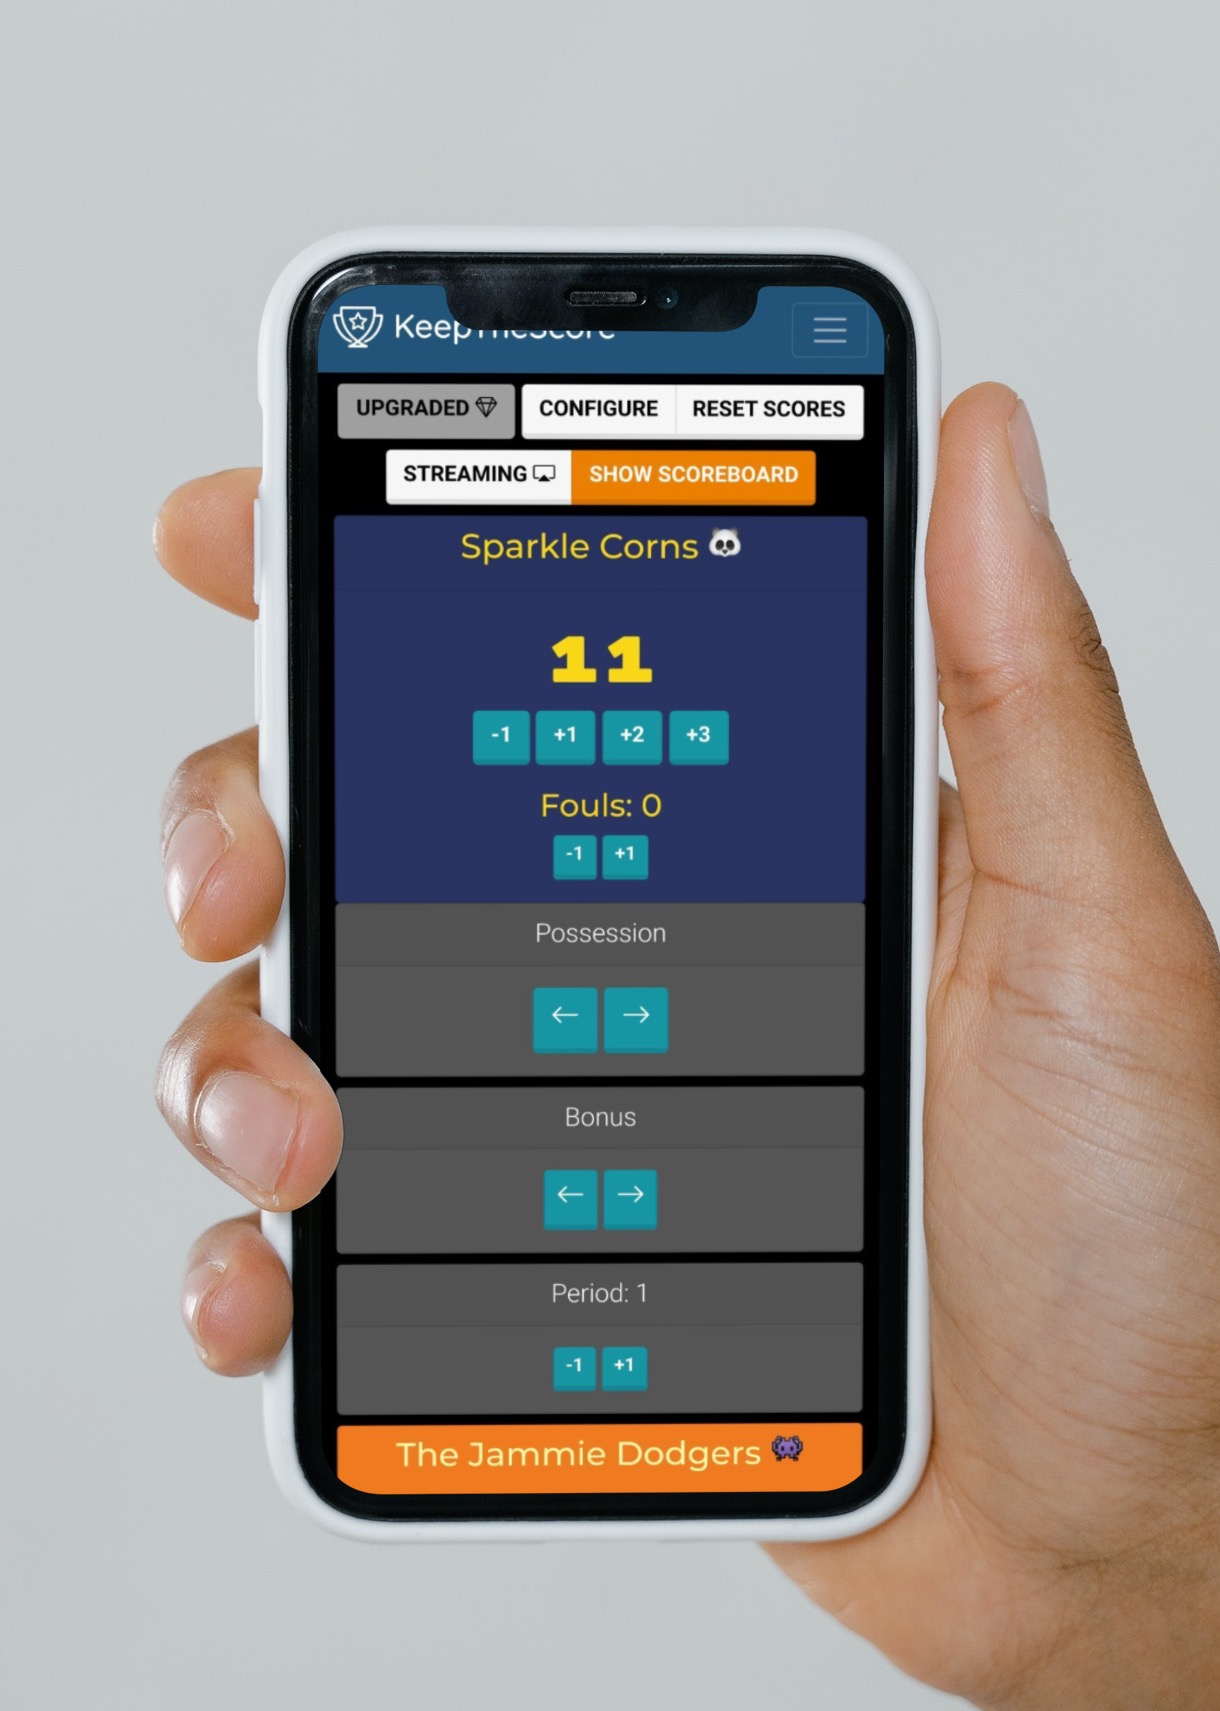 A mobile phone that is controlling a tennis scoreboard